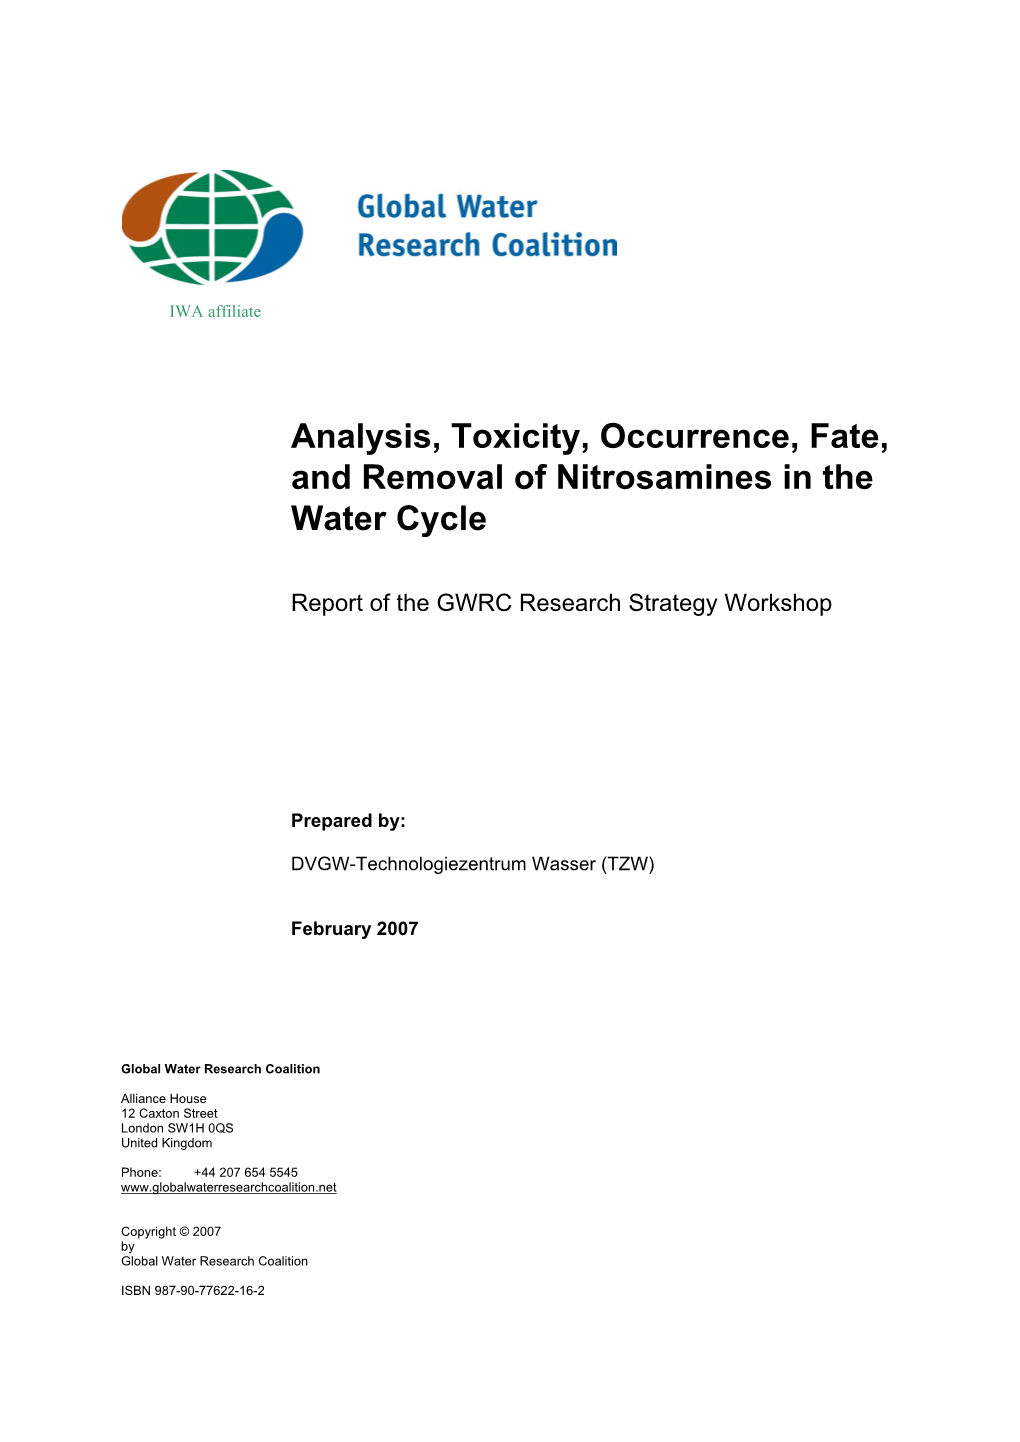 Analysis, Toxicity, Occurrence, Fate, and Removal of Nitrosamines in the Water Cycle